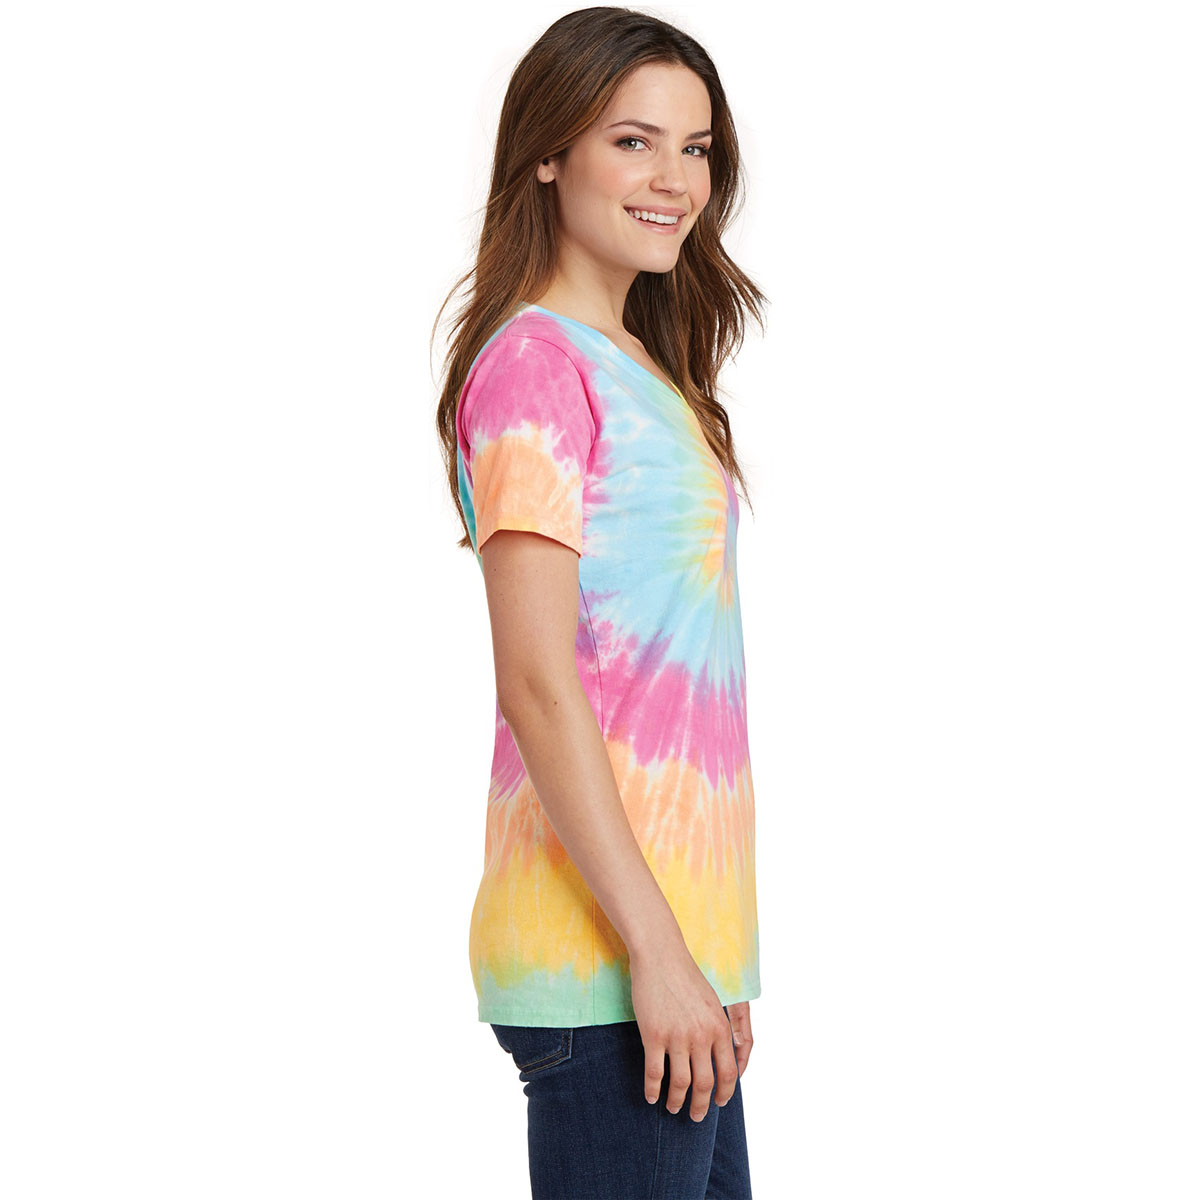 Colorfully cool, these groovy tees are a surefire way to stand out from the...